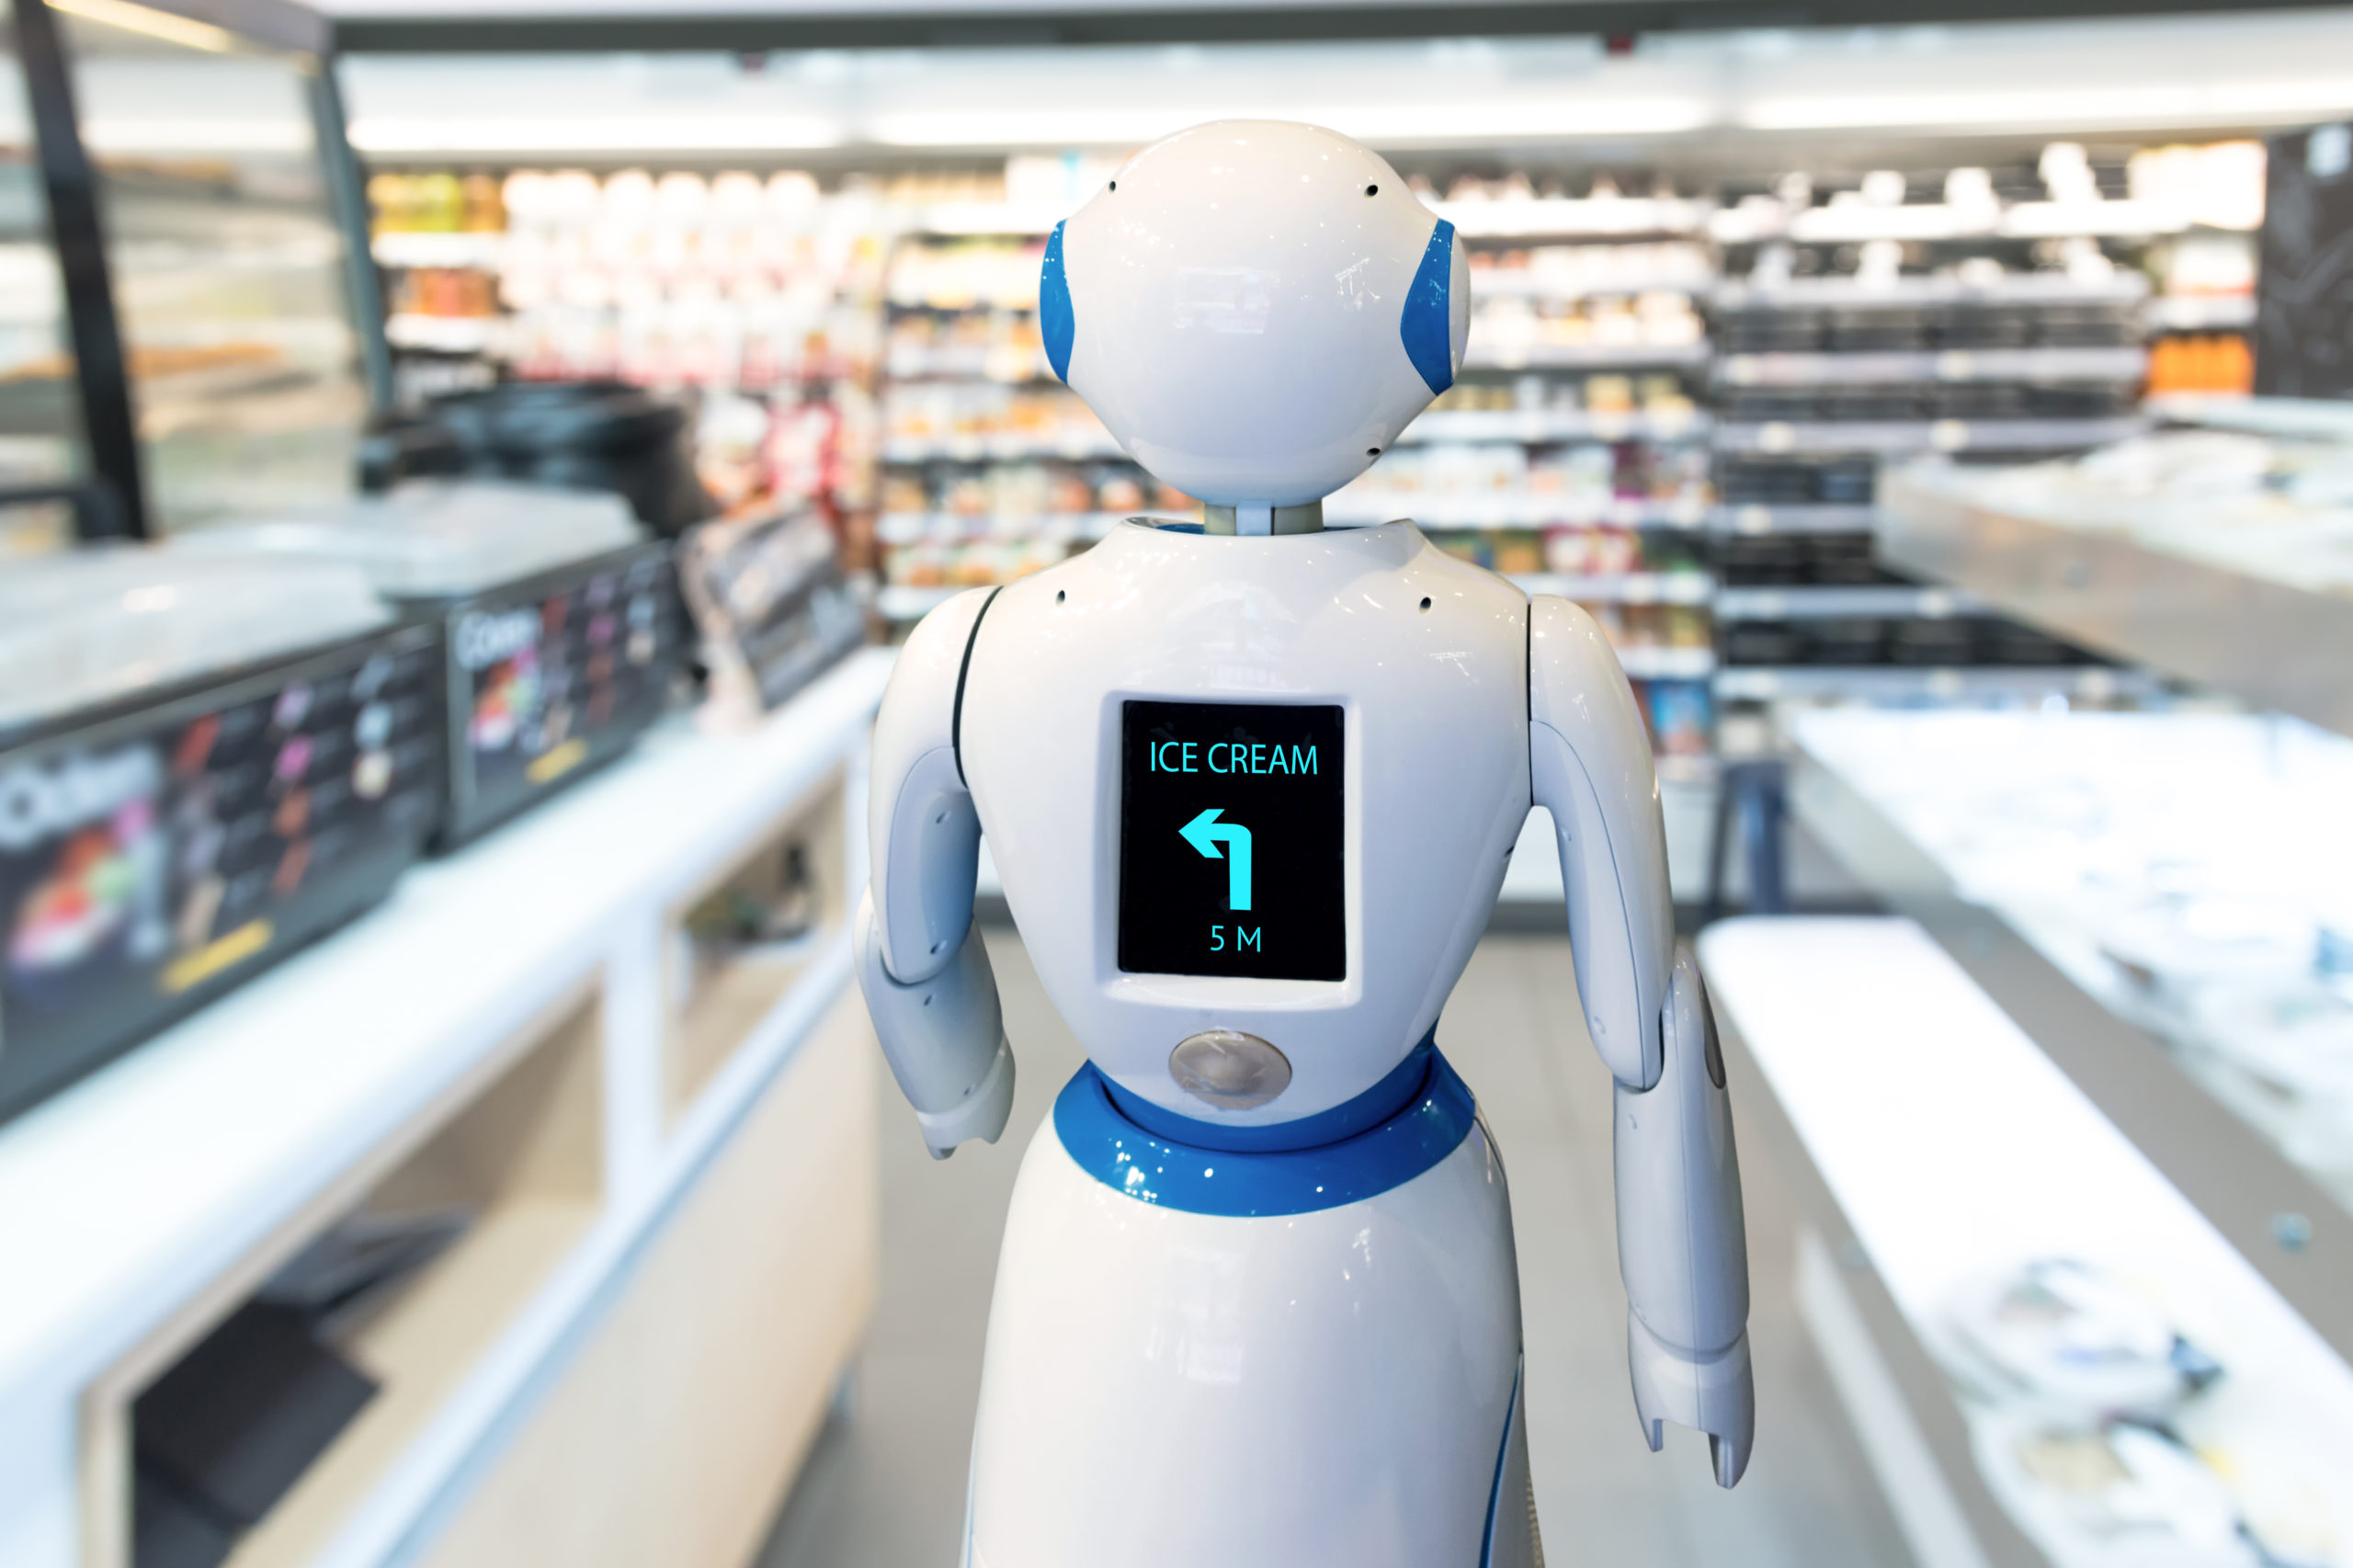 Smart retail , robot assistant service , robo advisor navigation technology in department store. Robot walk lead to guide customer to find items.